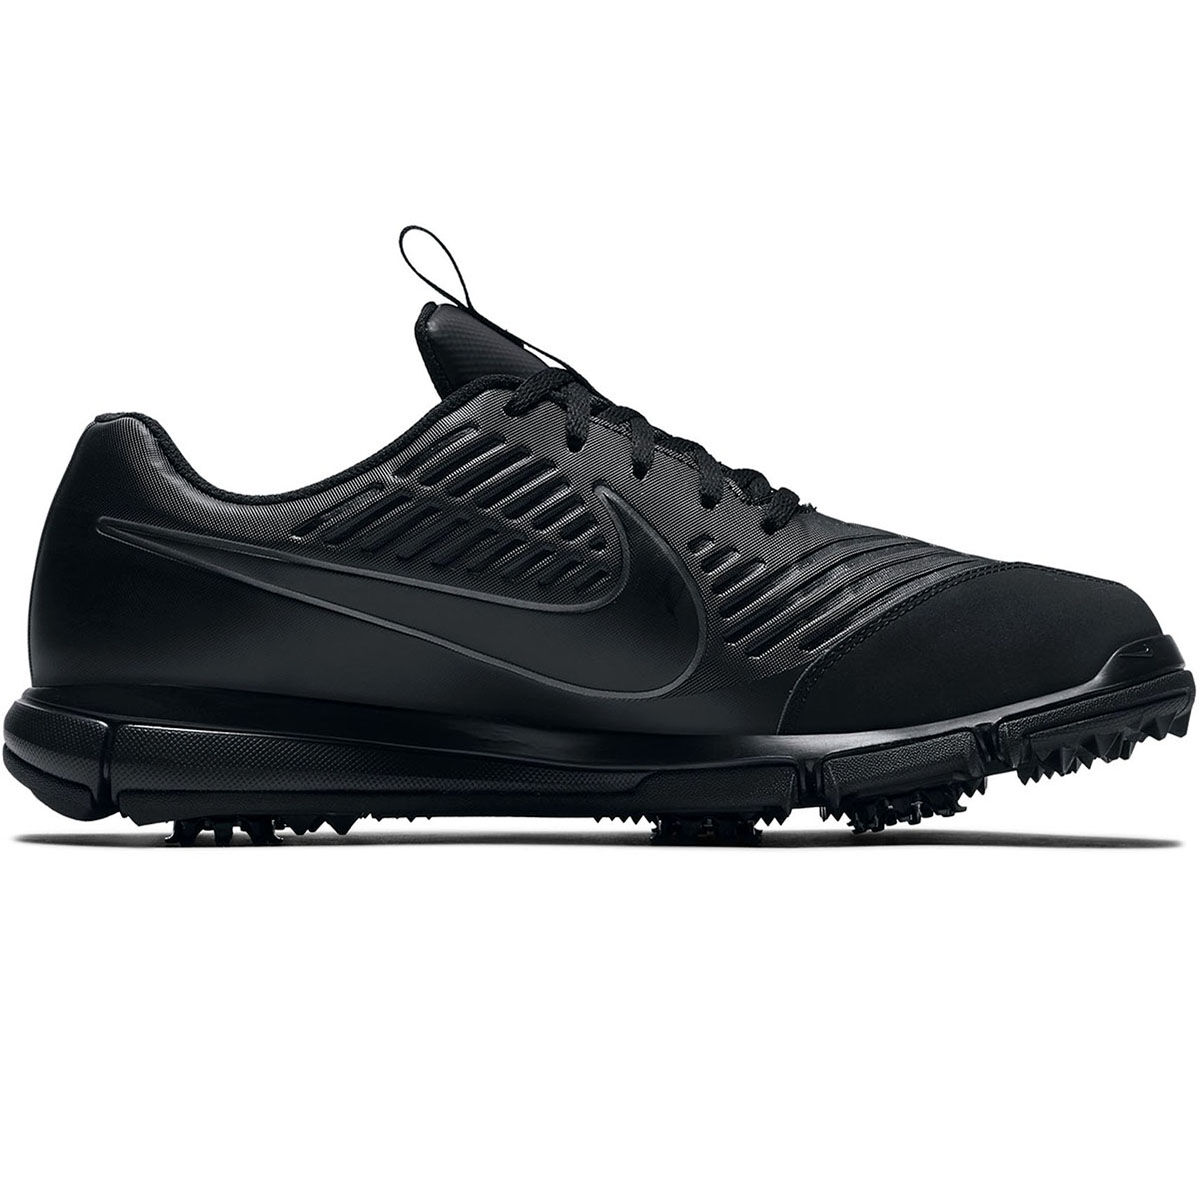 nike golf shoes spiked